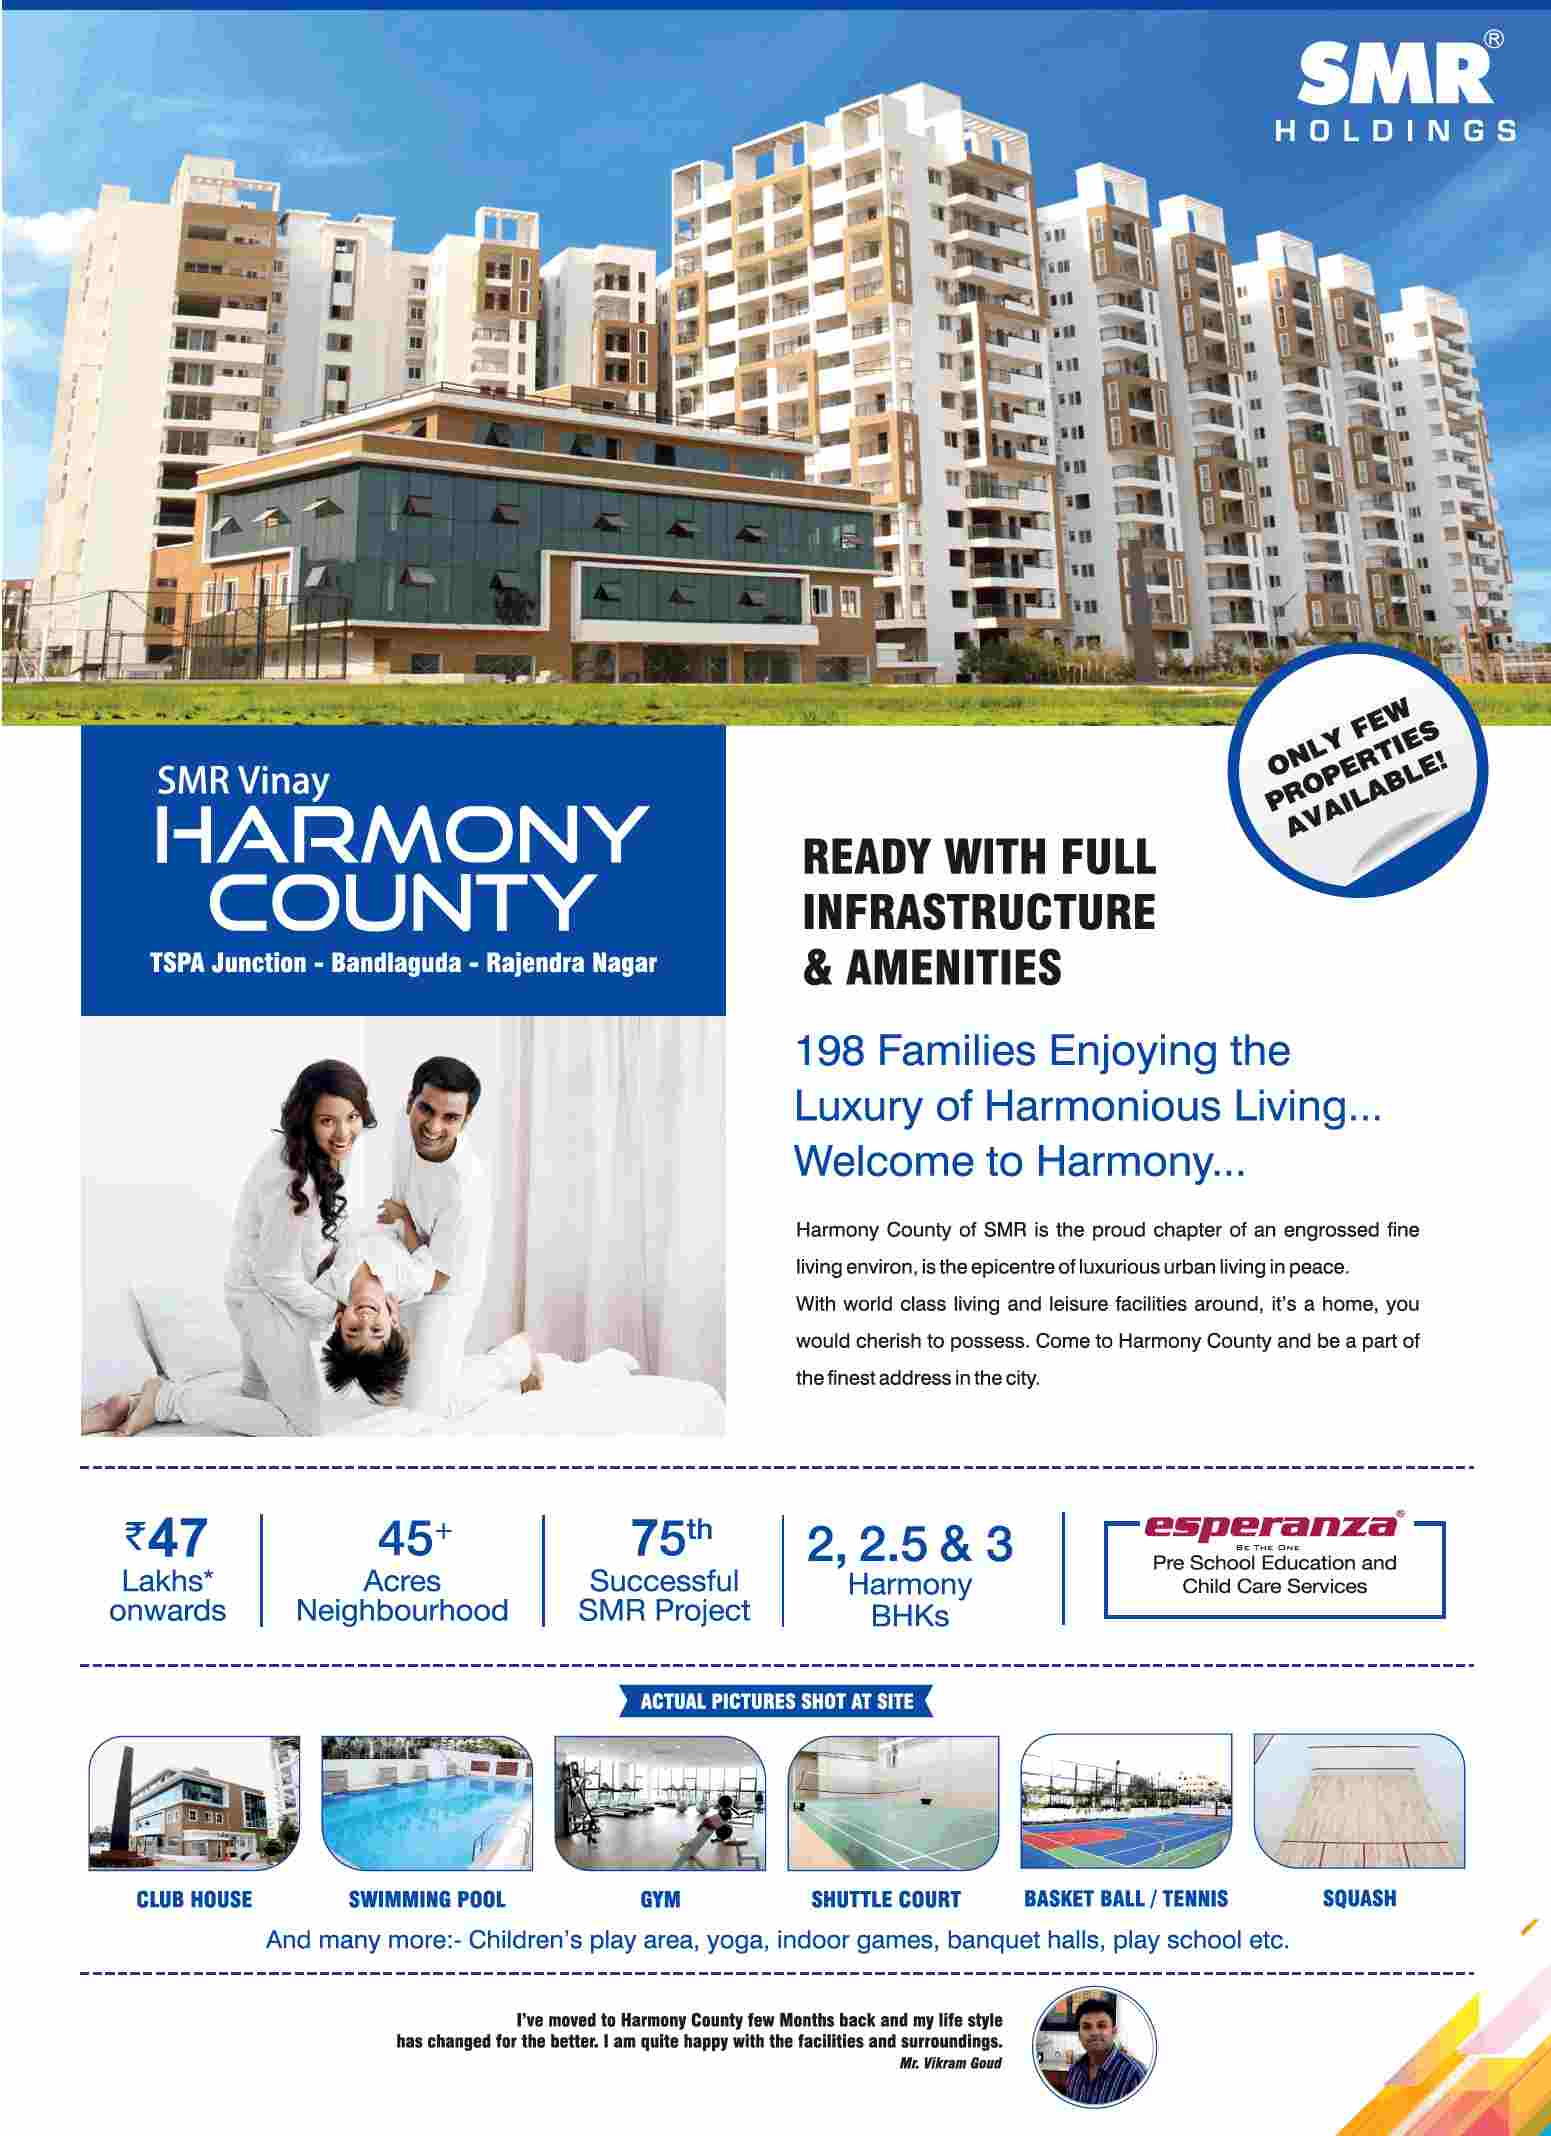 SMR Vinay Harmony County is ready with full infrastructure & amenities in Hyderabad Update